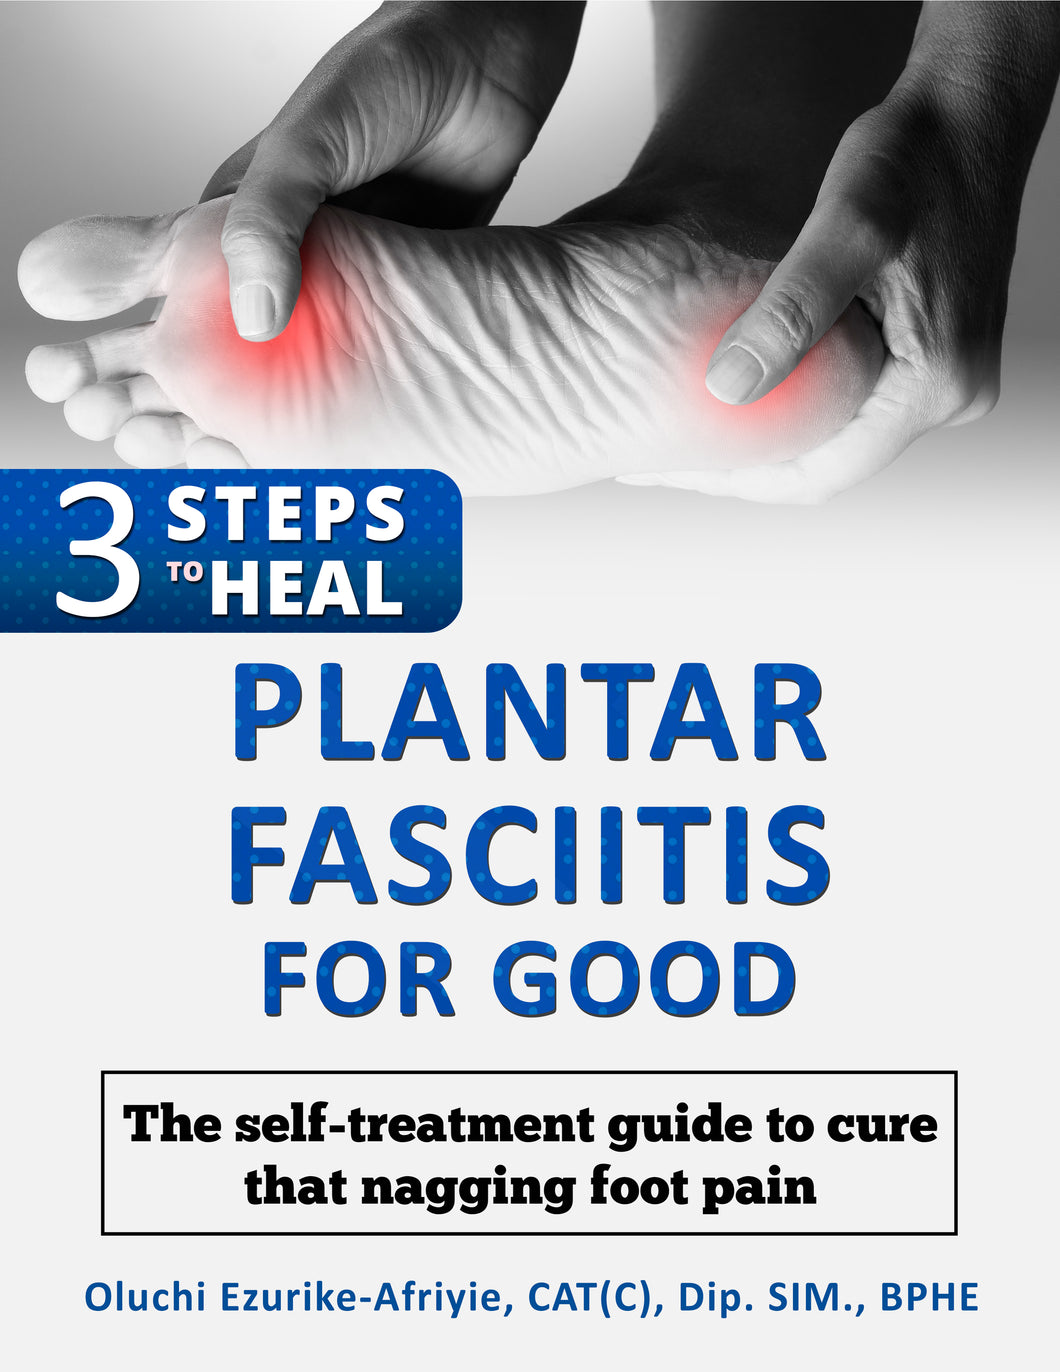 3 Steps to Heal Plantar Fasciitis for Good: The self-treatment guide to cure that nagging foot pain